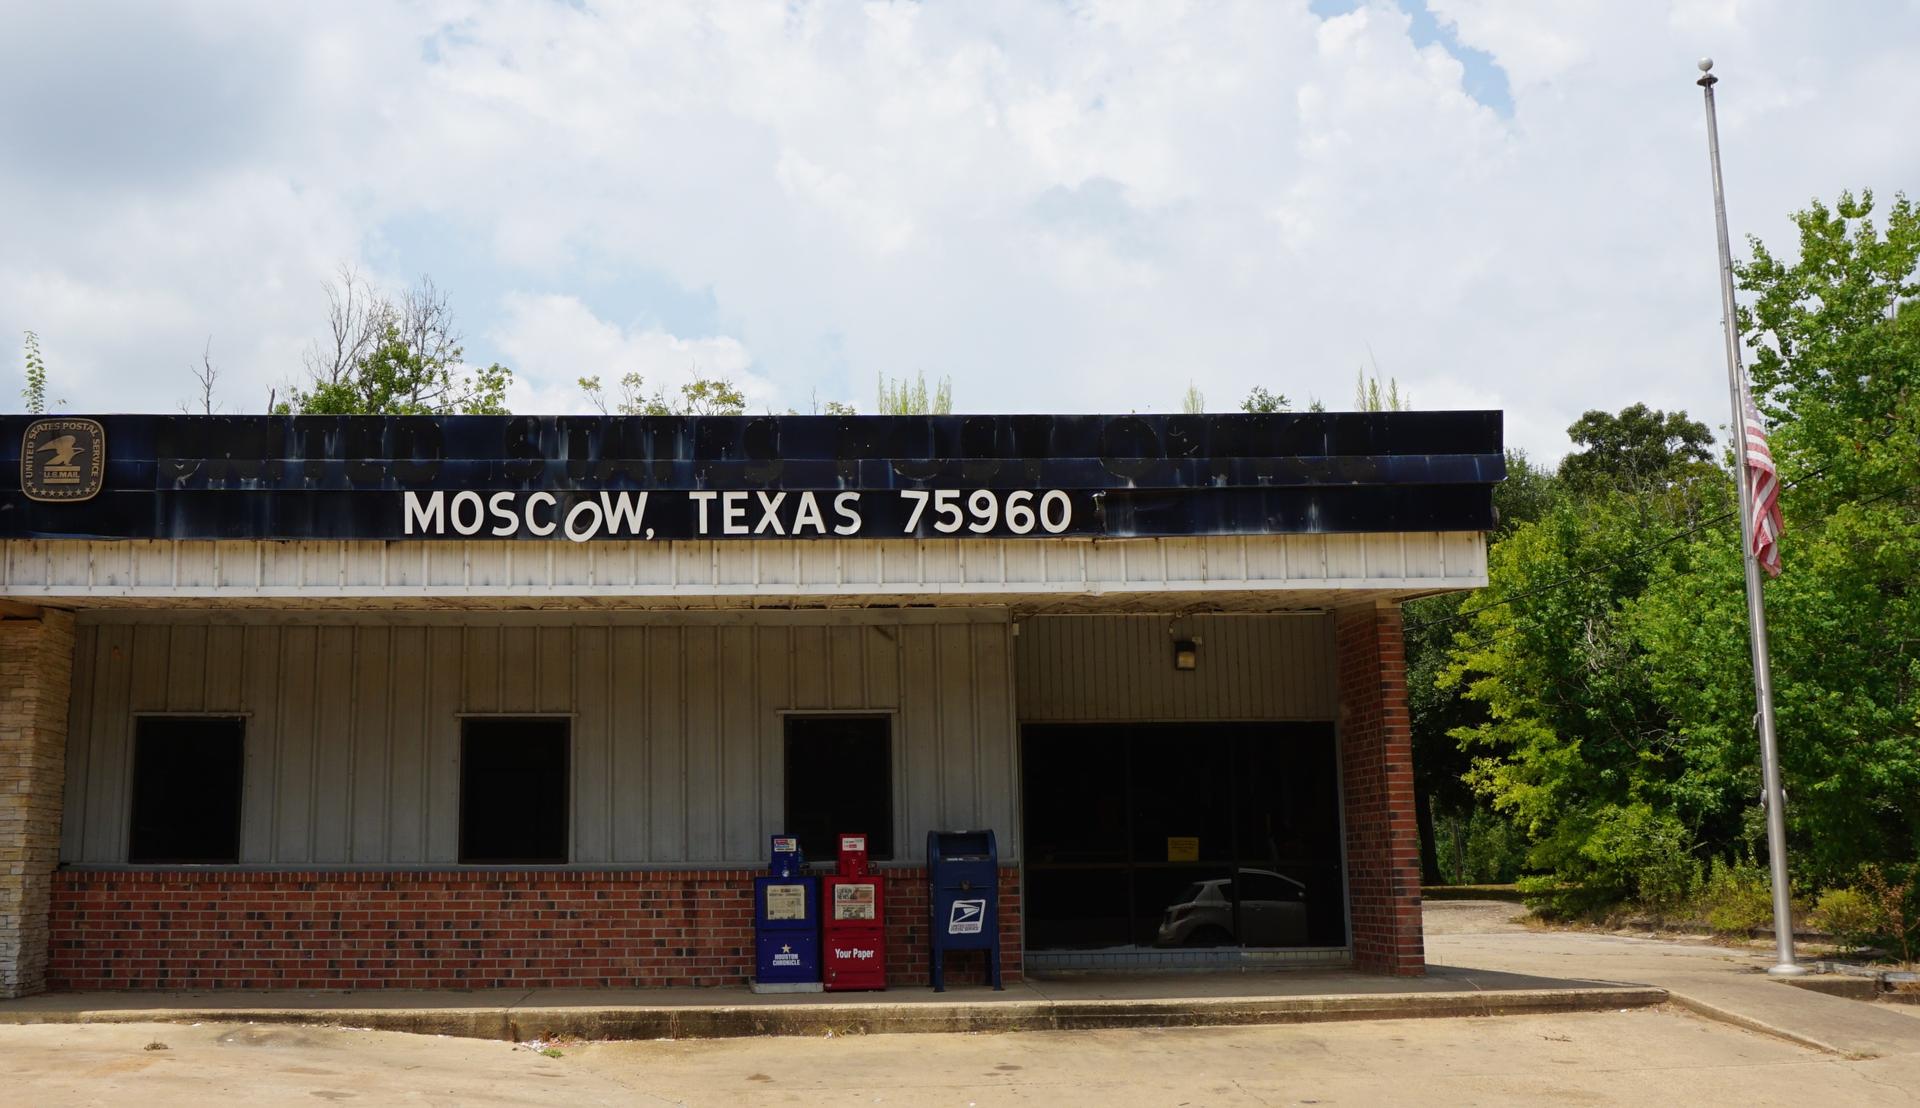 The post office in Moscow, Texas.